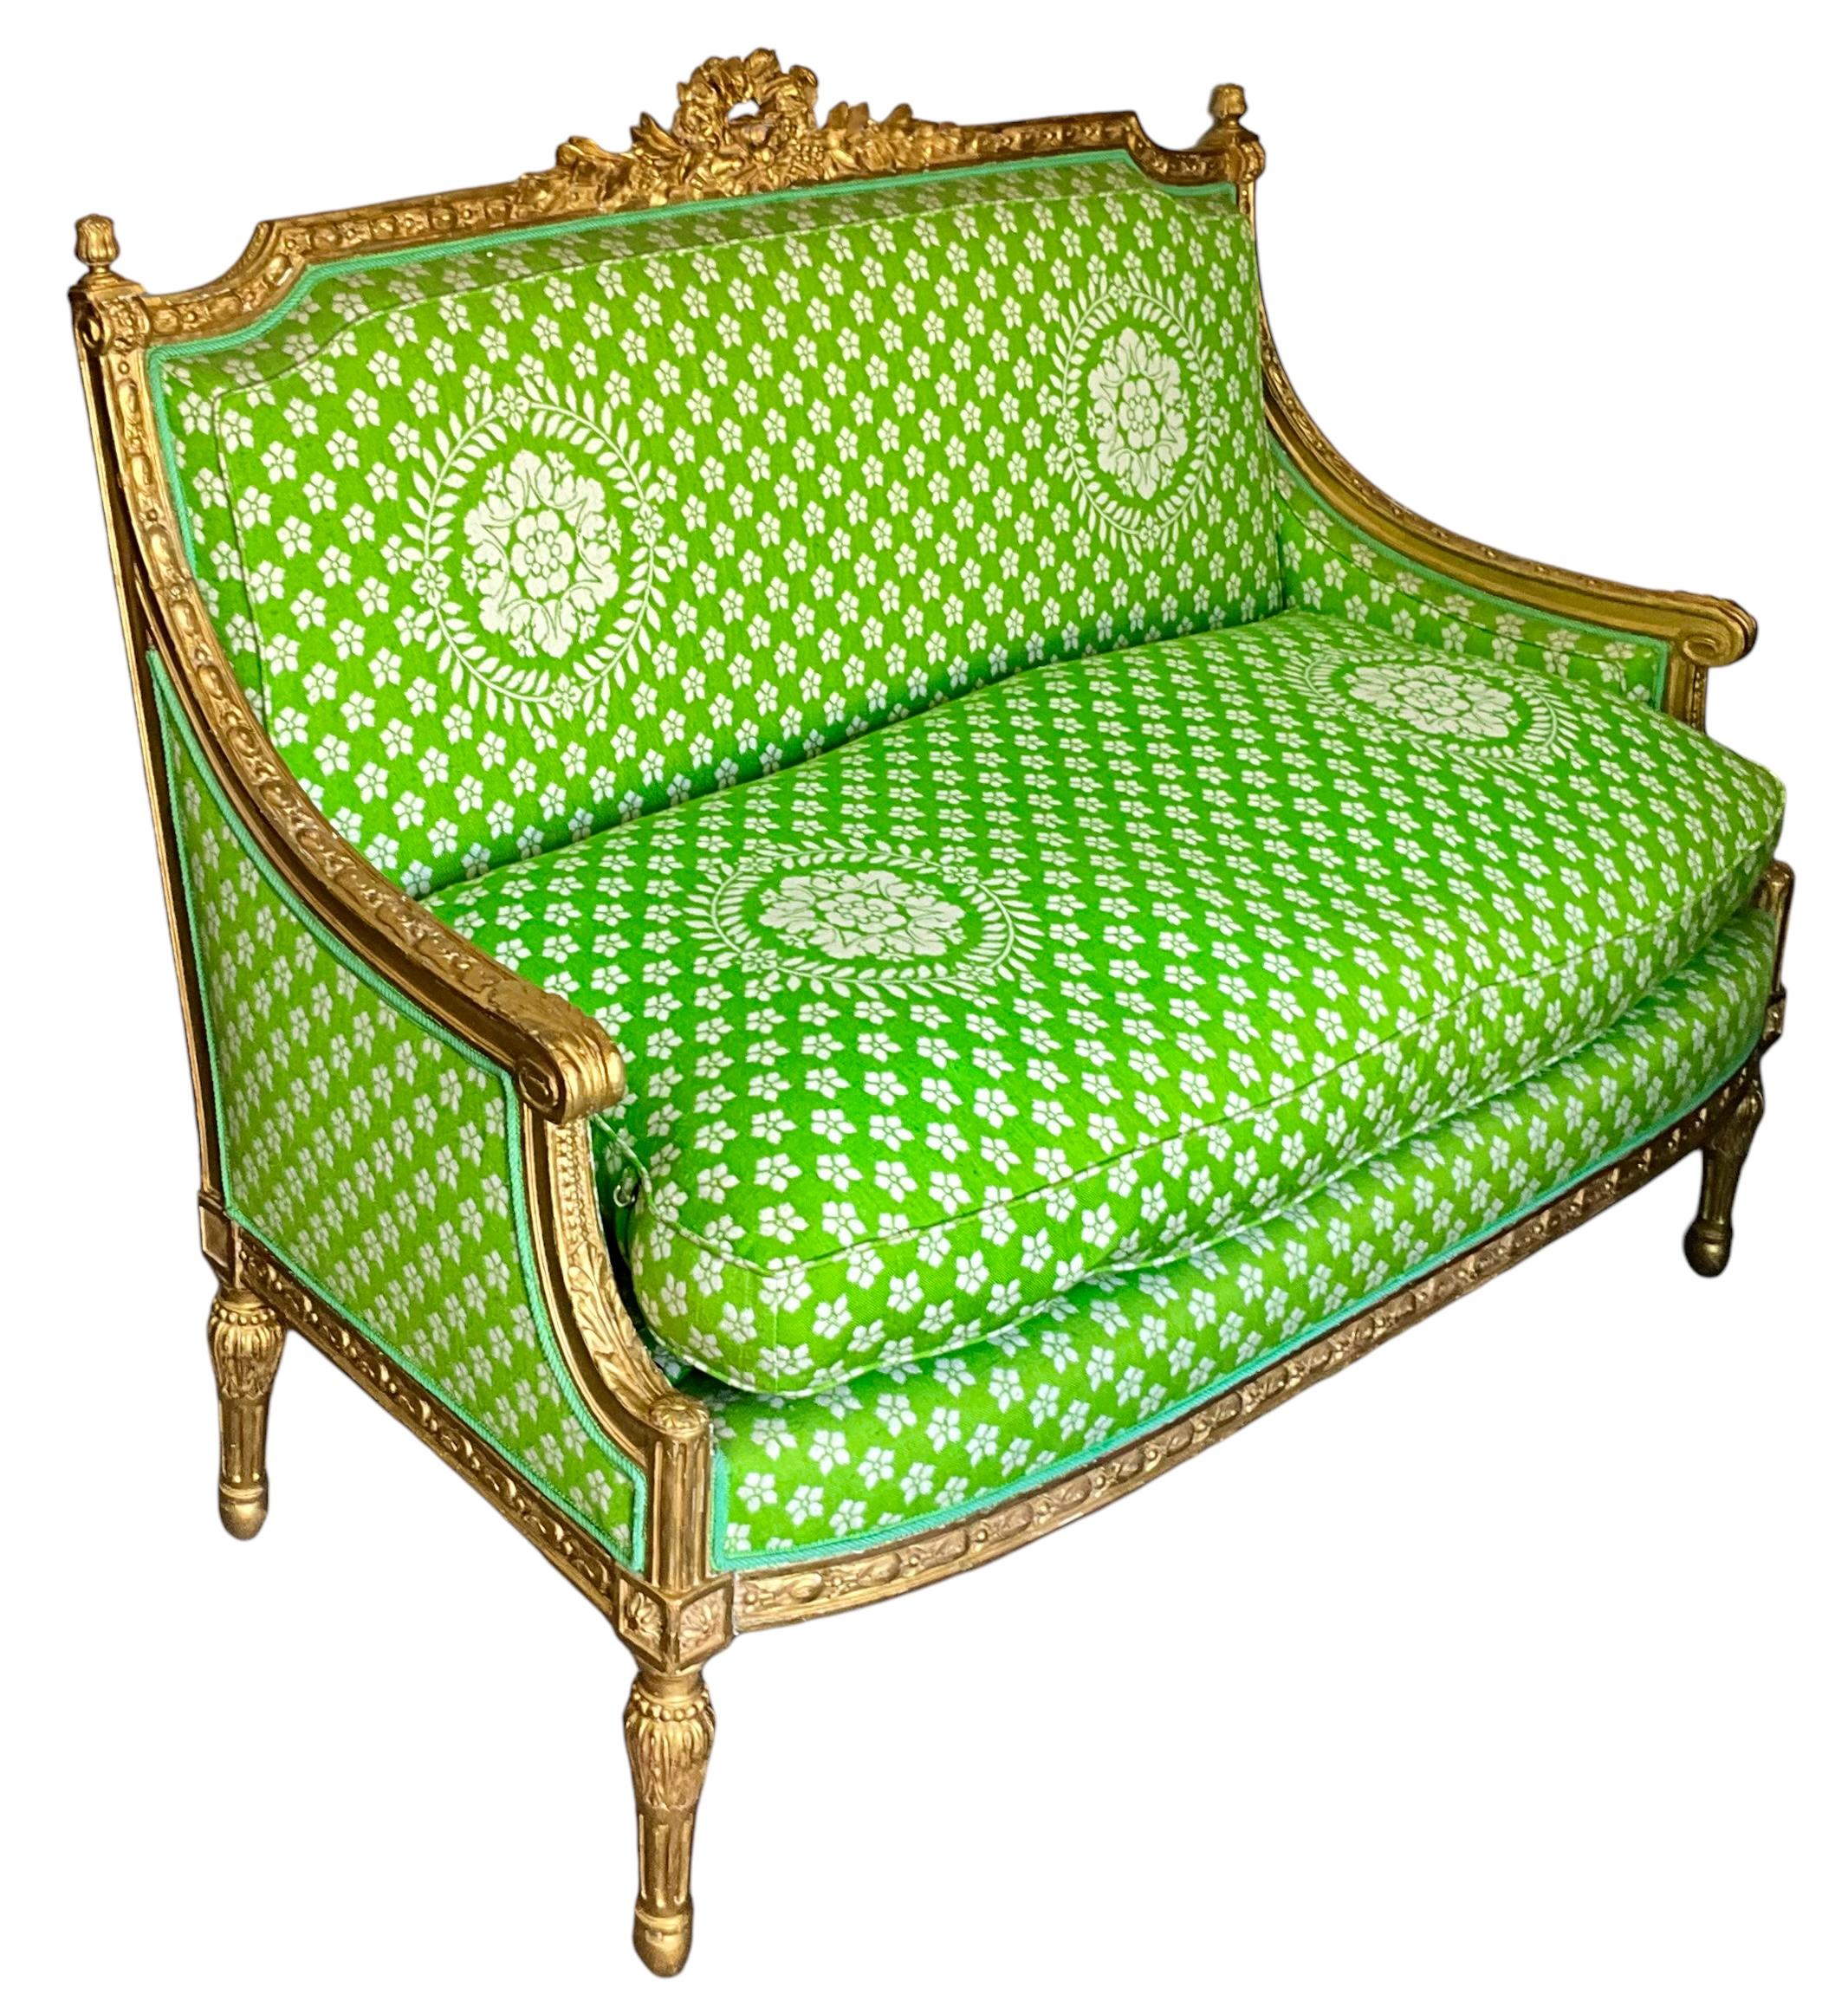 Upholstery 19th-C. French Louis XVI Style Carved Giltwood Settee With Down Cushion For Sale